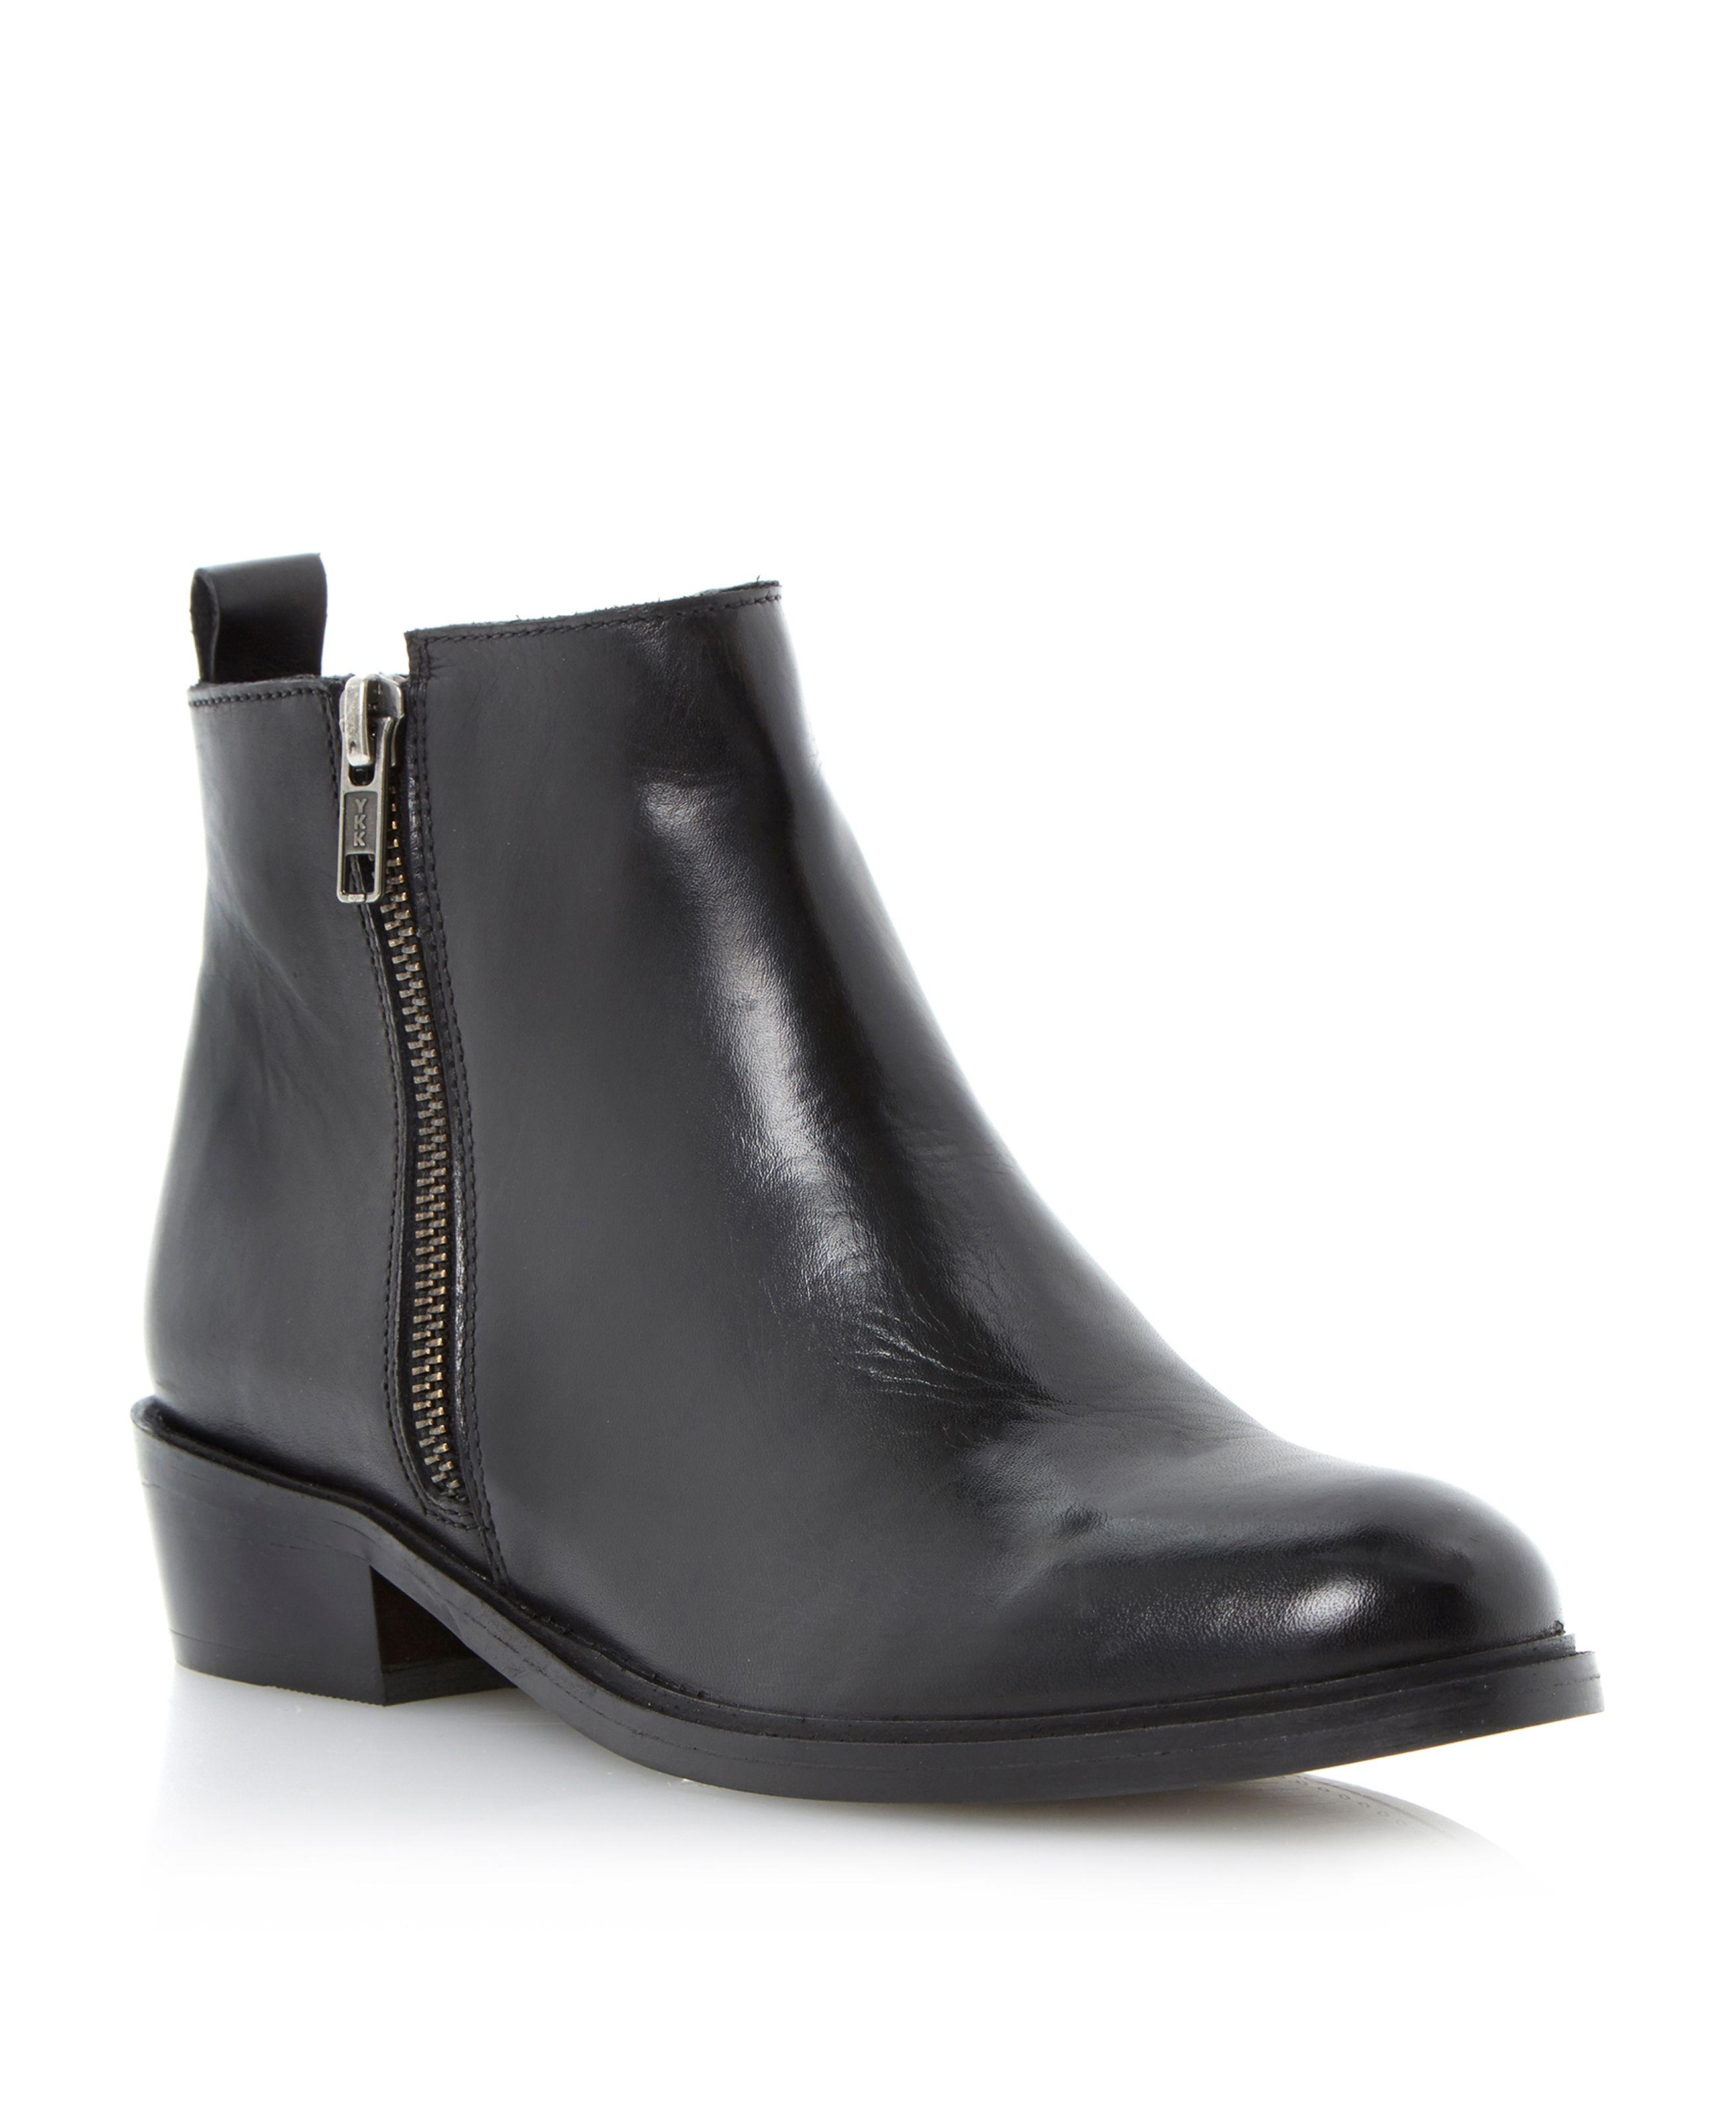 Dune Pippie Side Zip Leather Ankle Boots in Black | Lyst